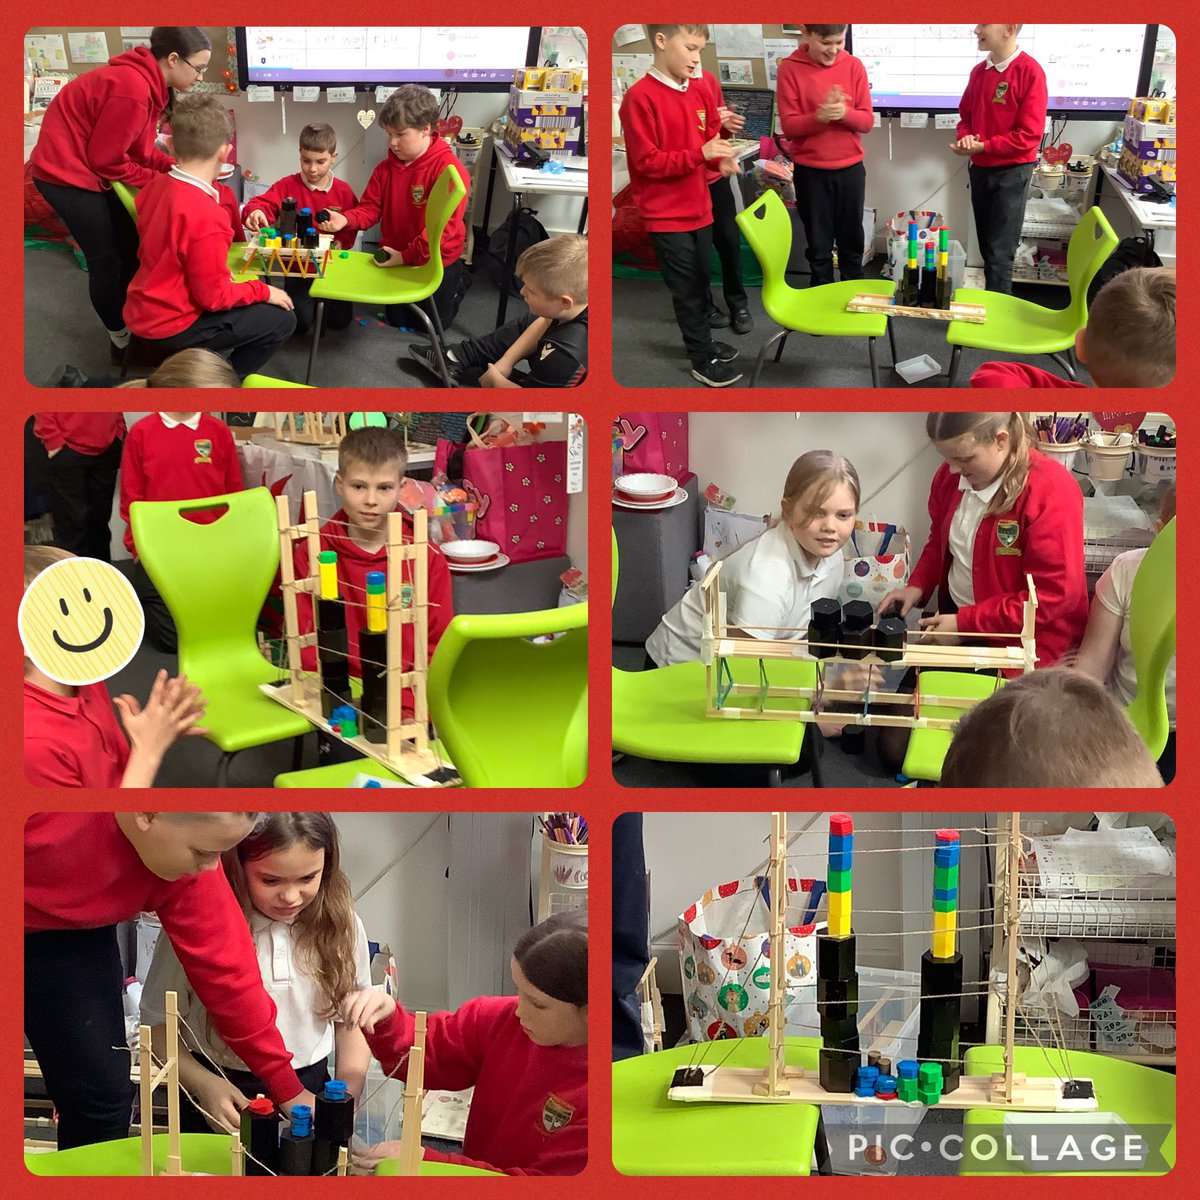 This afternoon we put our engineering skills to the test and put our bridges through their paces to find out how much weight they could hold. I think it’s fair to say that all groups built amazing bridges #ambitiouscapablelearners 🌉👷‍♀️👷@garntegprimary